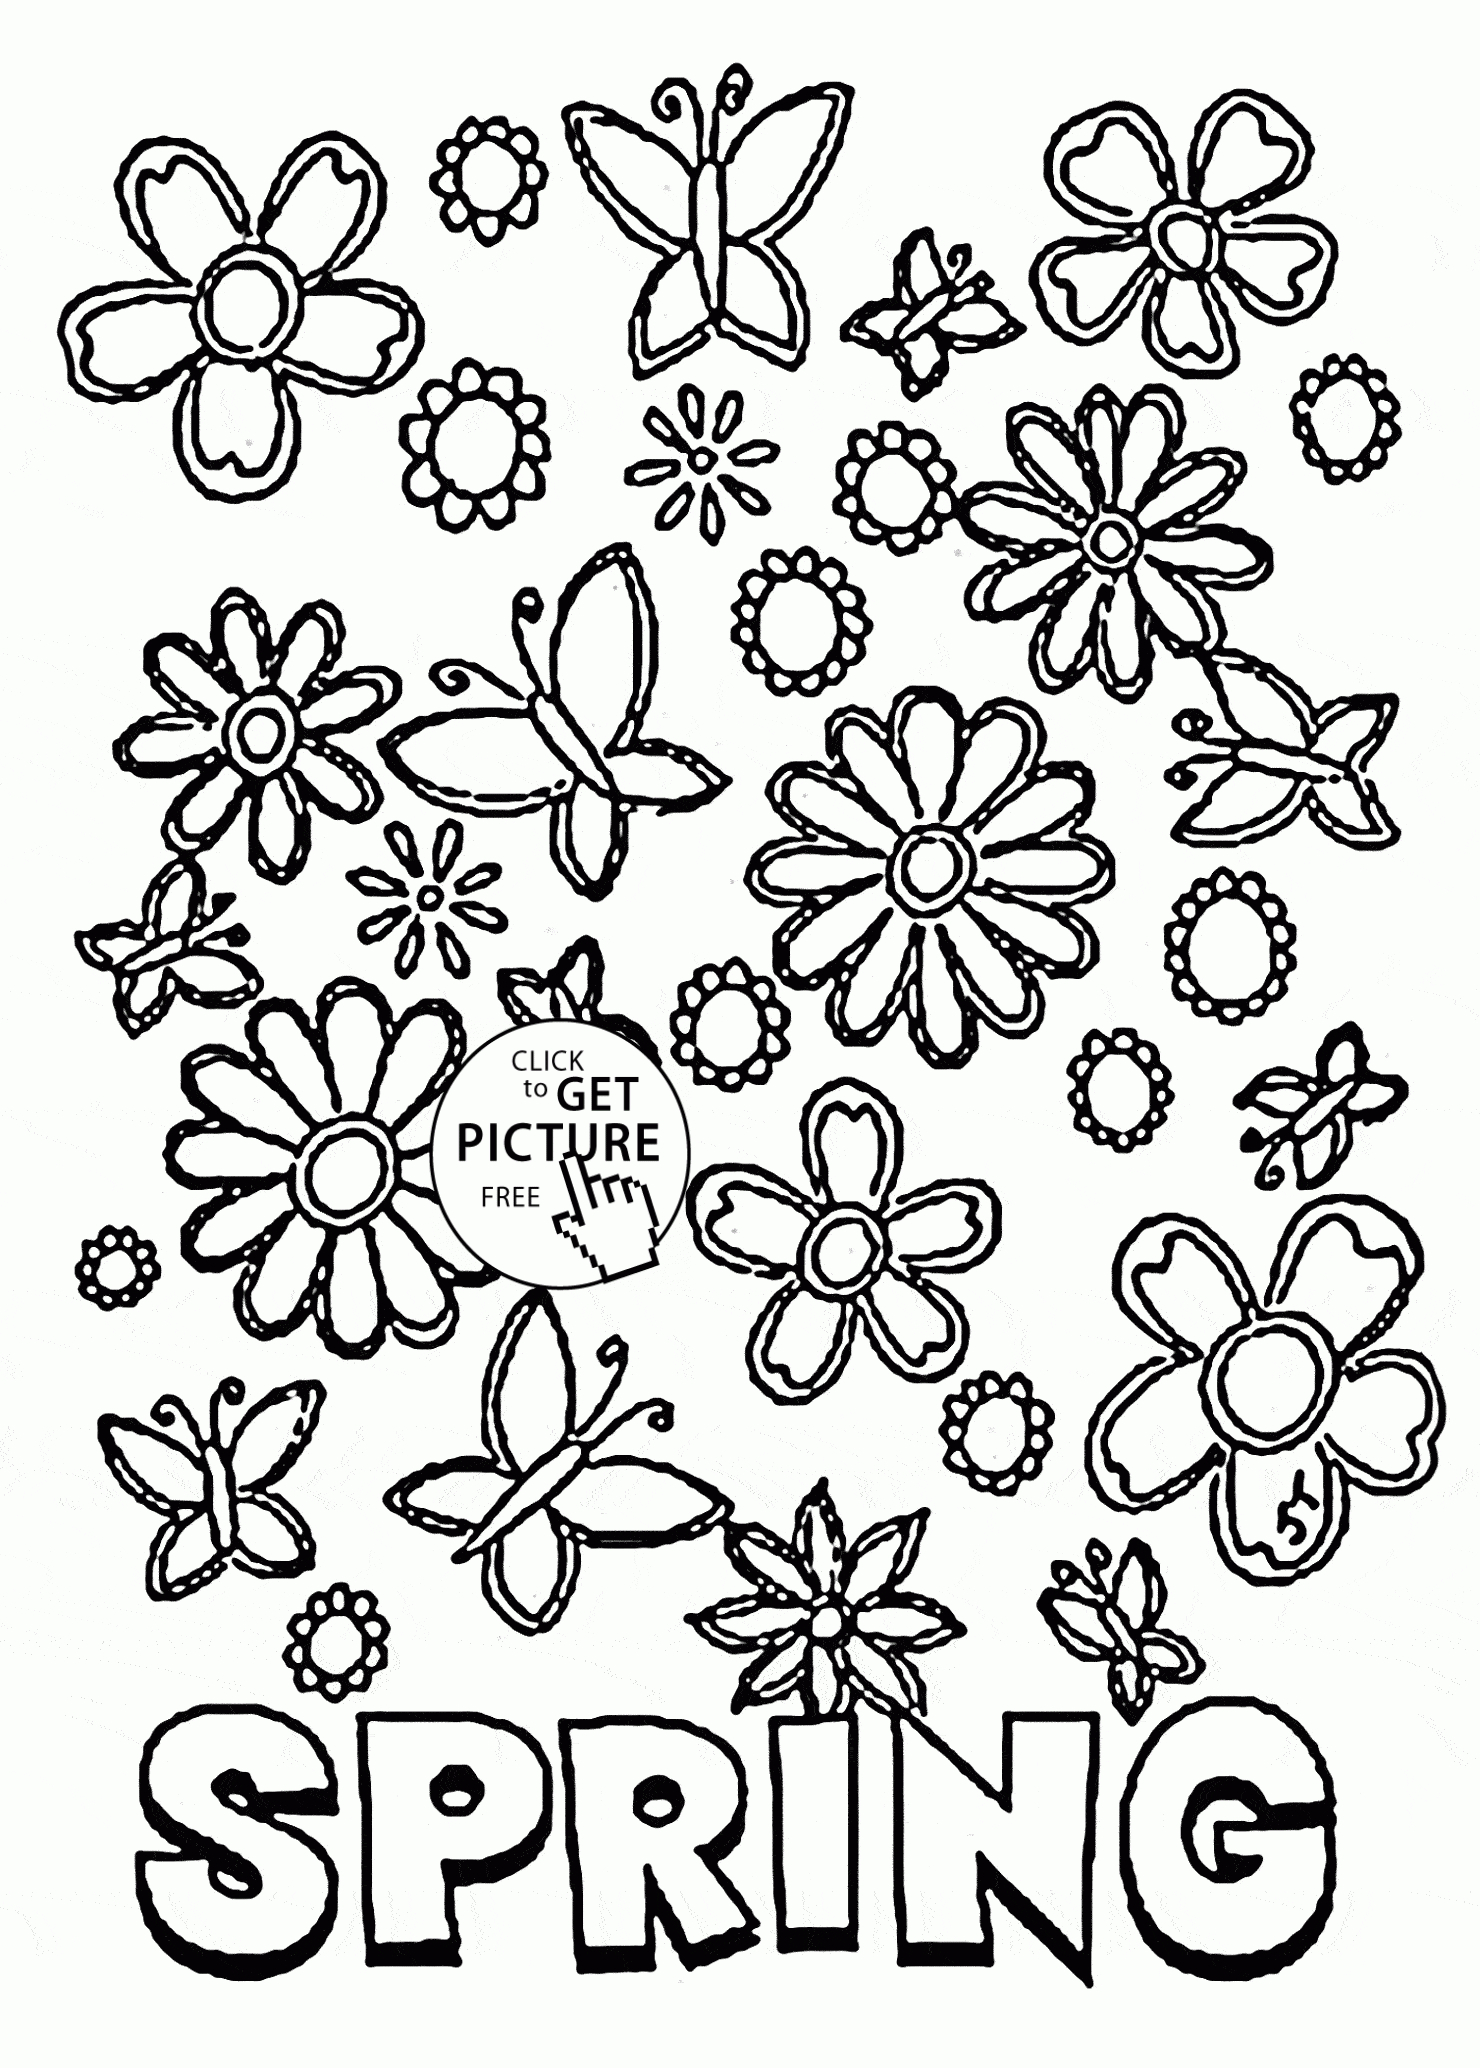 Many Spring Flowers Coloring Page For Kids, Seasons Coloring Pages - Free Printable Spring Pictures To Color